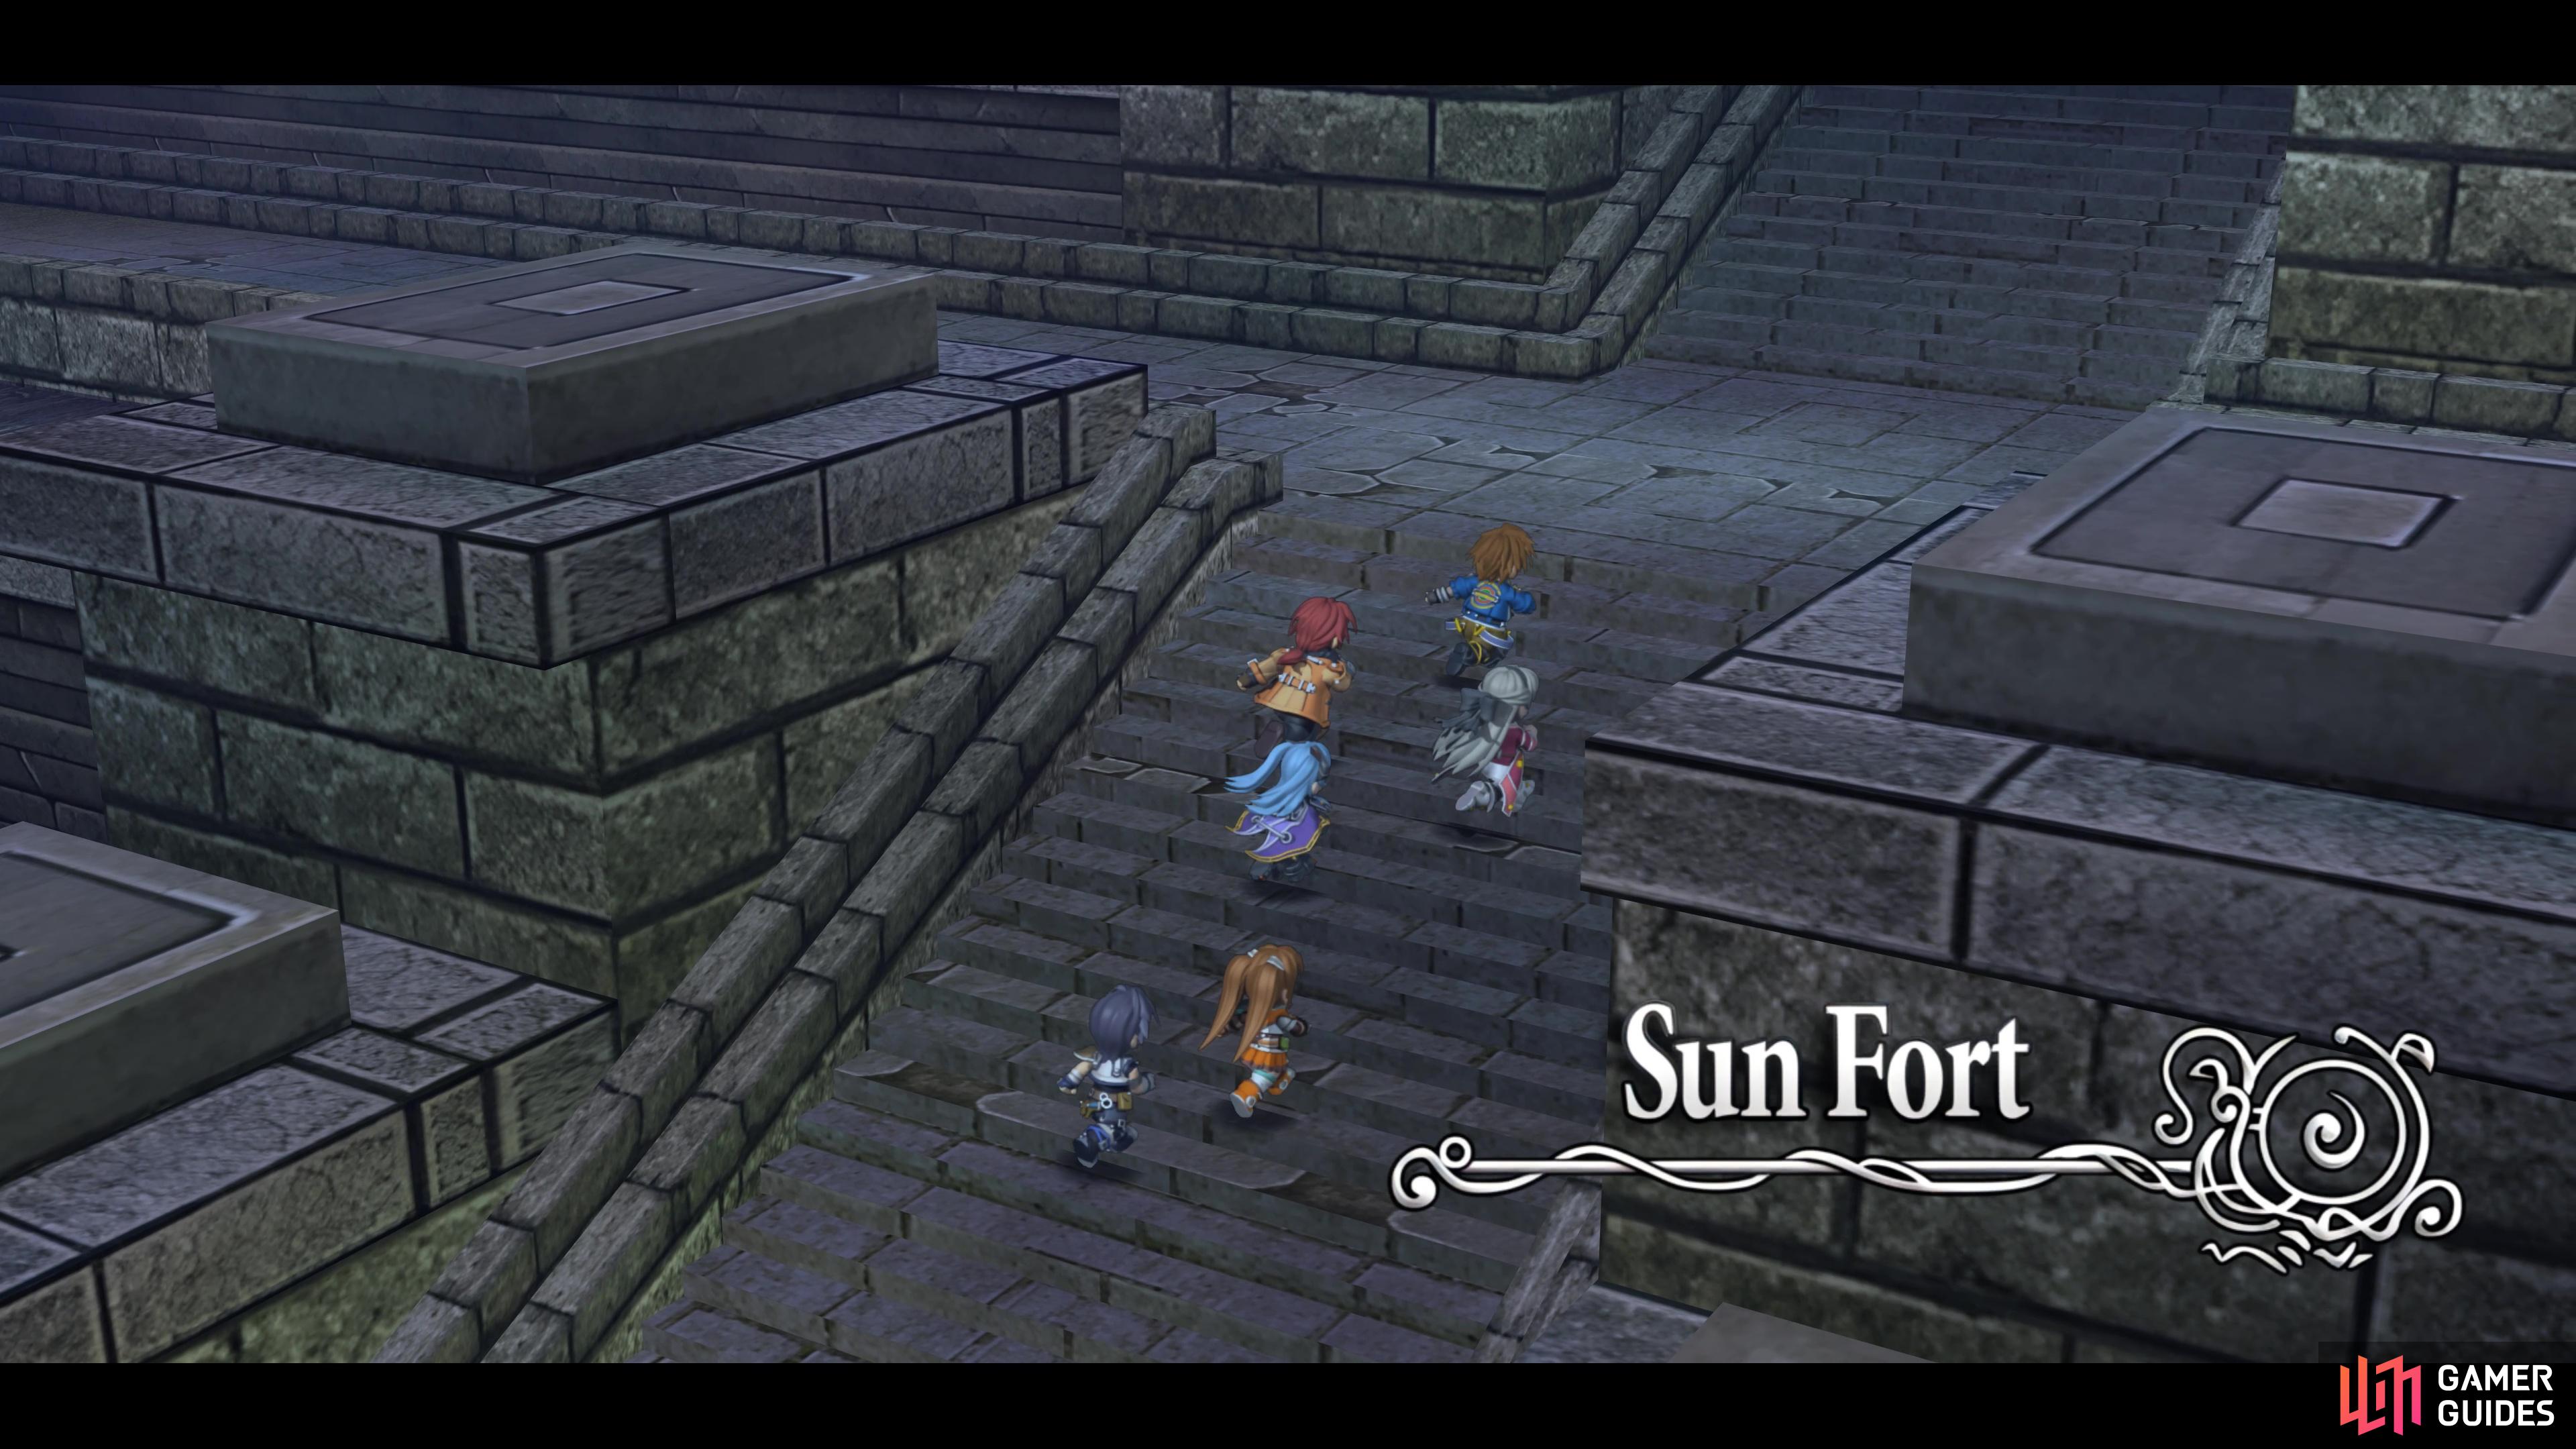 The Sun Fort is the final dungeon in the game.